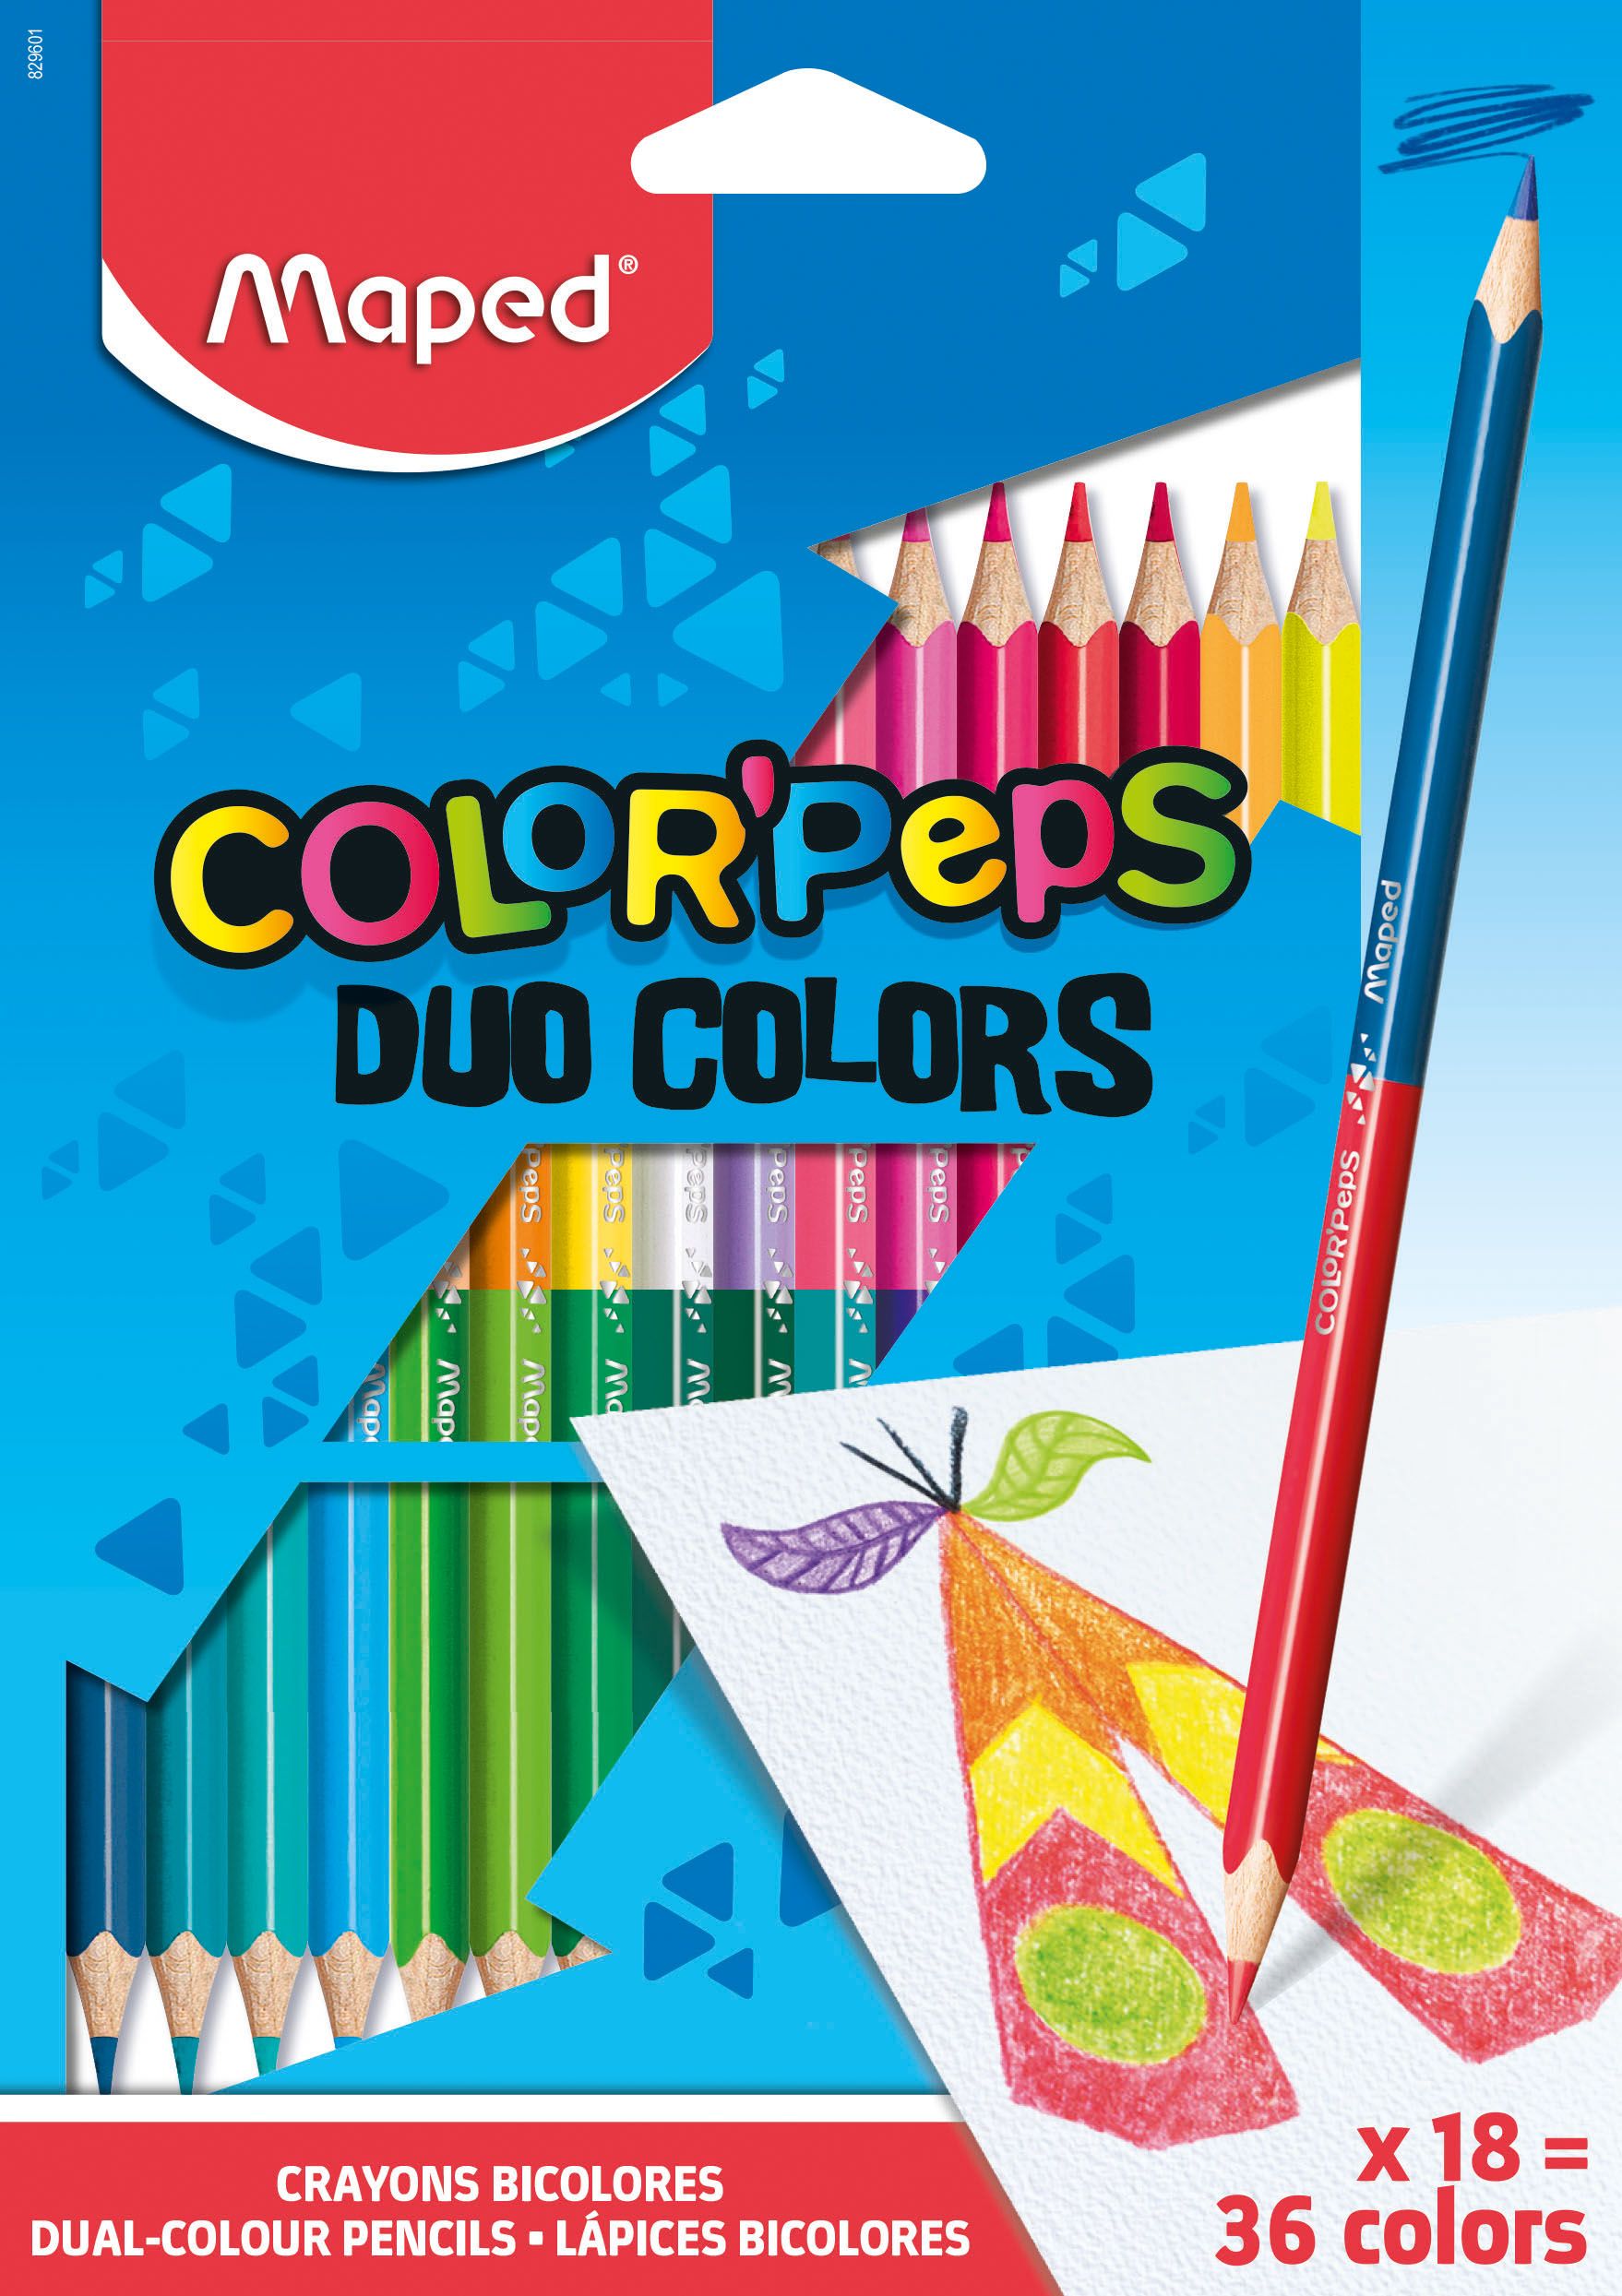   MAPED COLOR'PEPS   ,  , ,  ,   , 36 , 18  